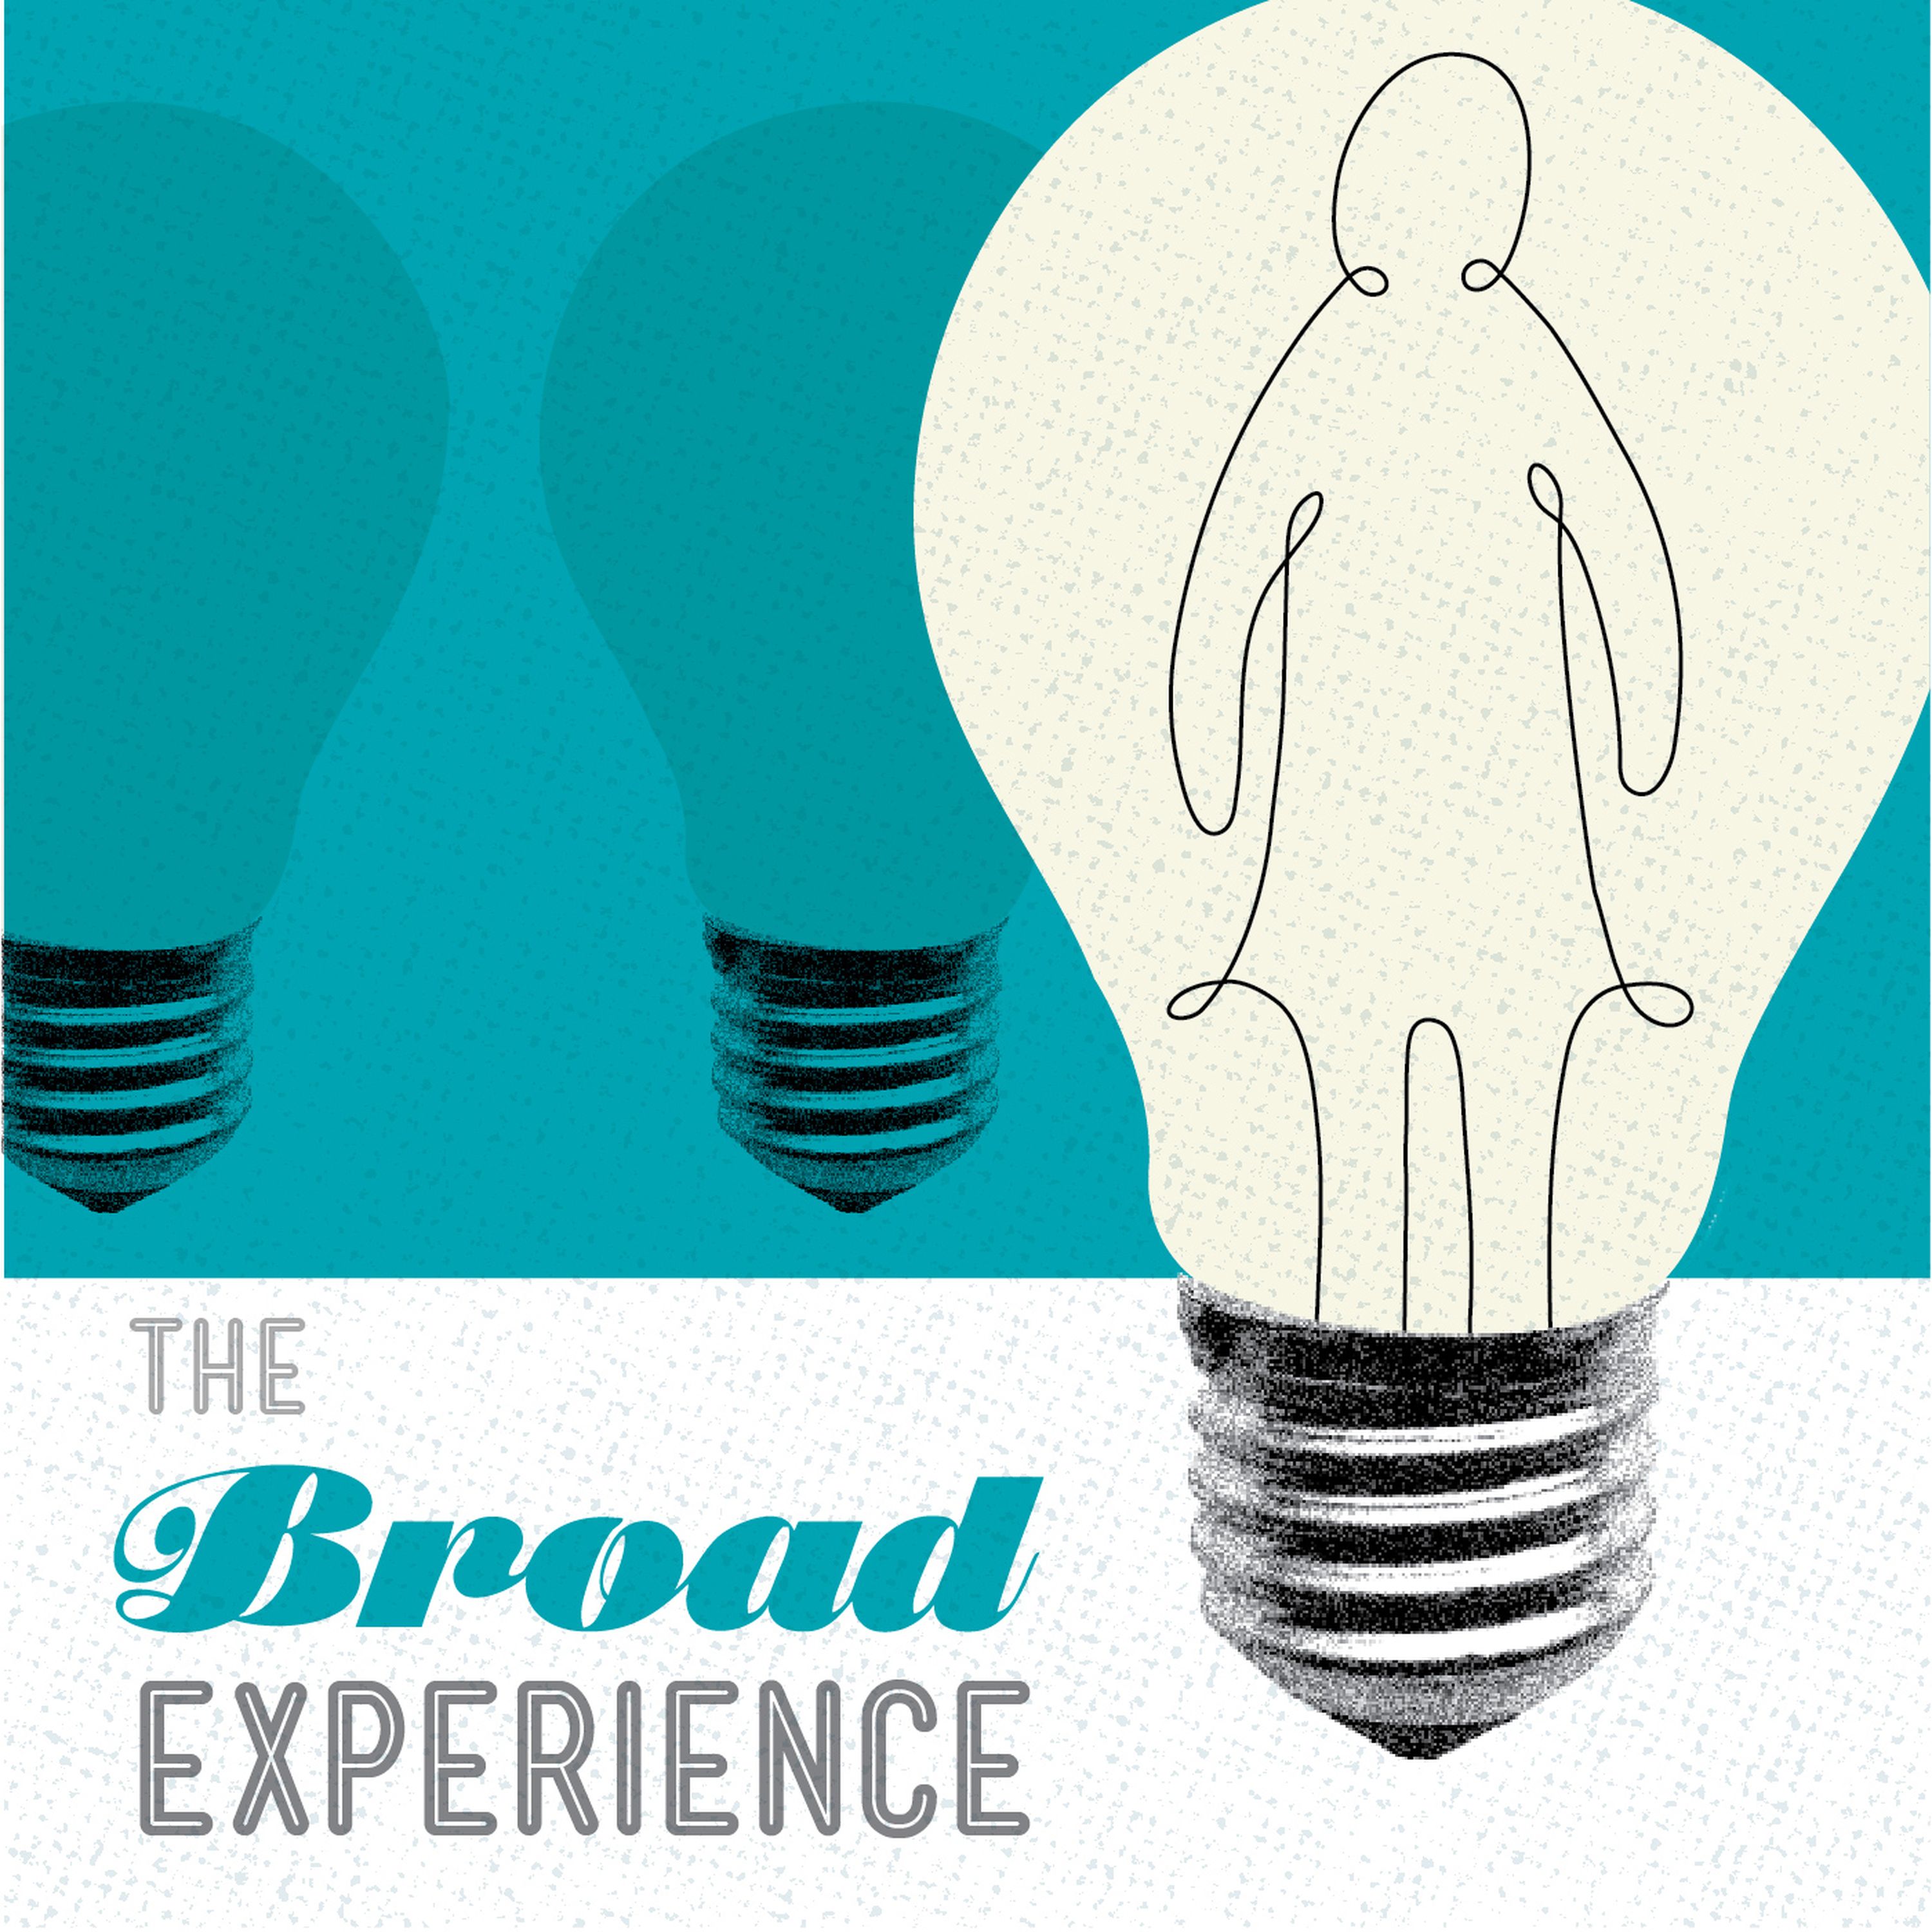 The Broad Experience 54: Power and body language